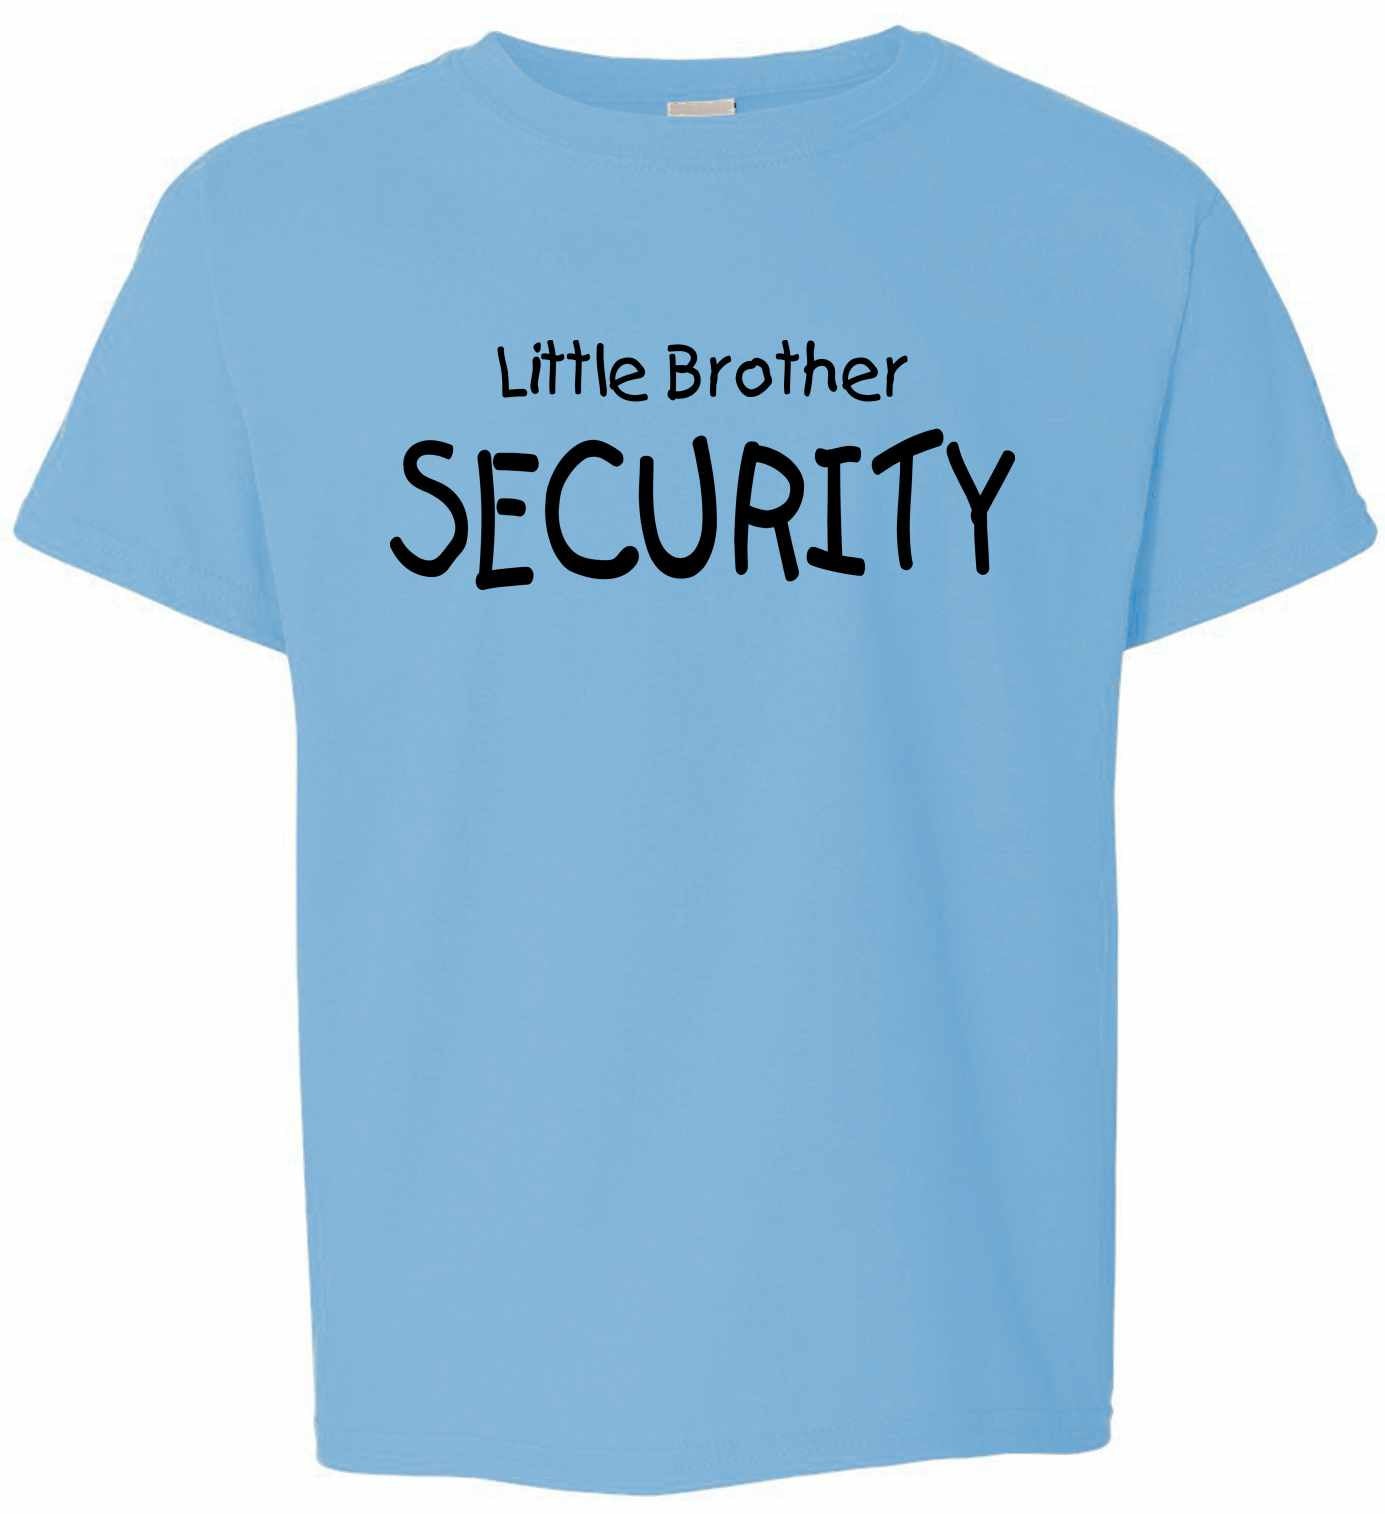 Little Brother Security on Kids T-Shirt (#972-201)